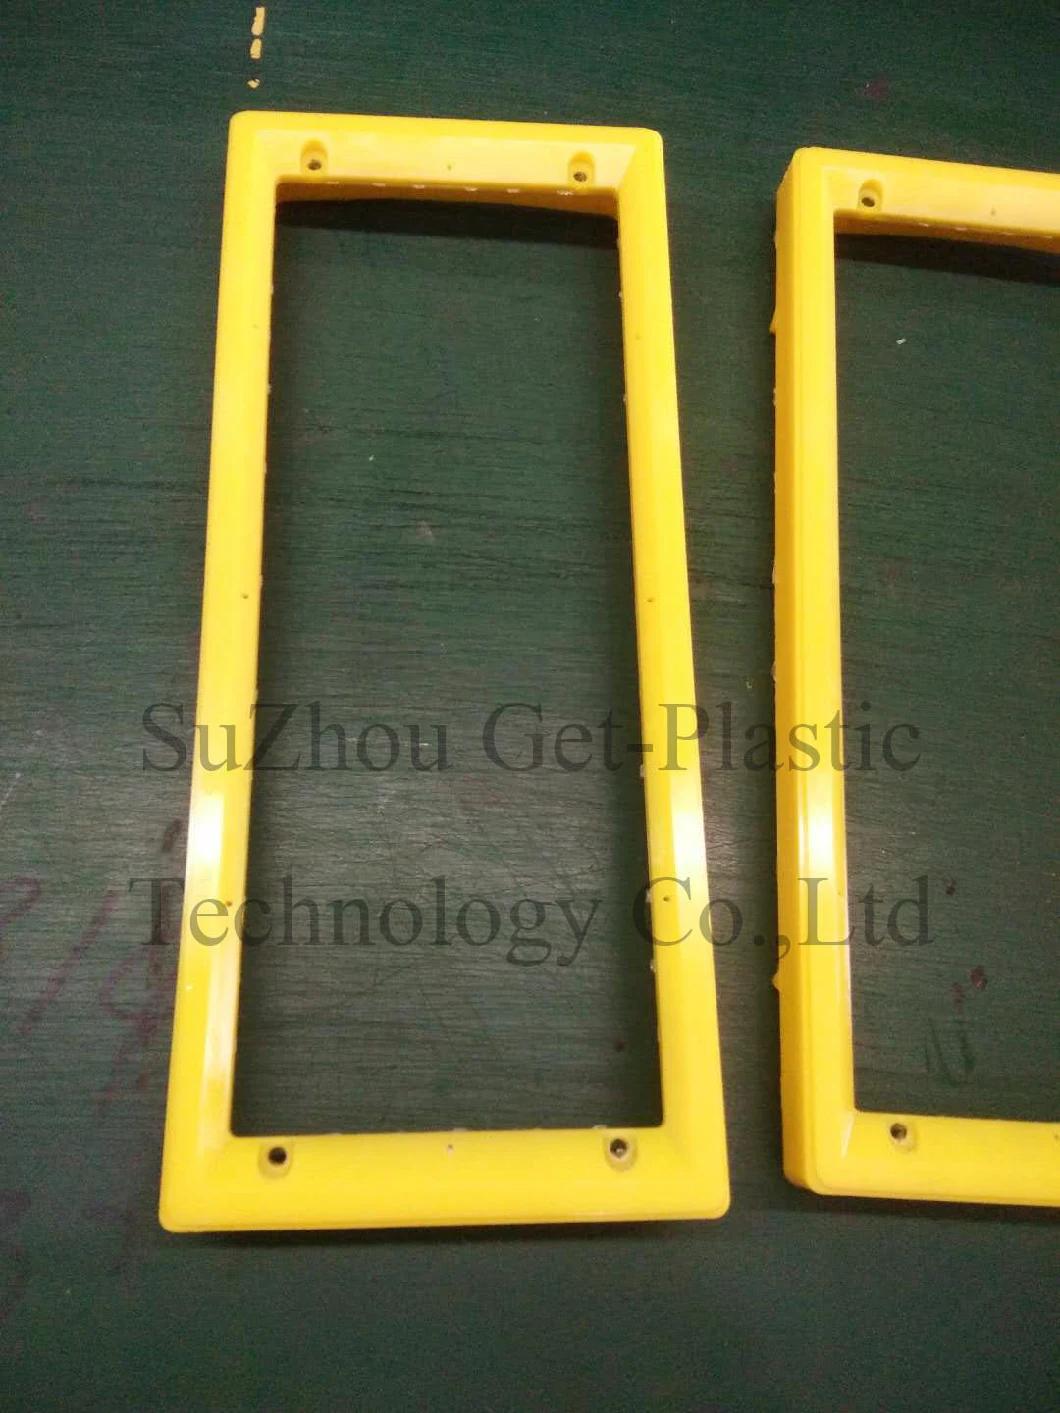 Plastic Parts and Injection Molds in Plastic Factory